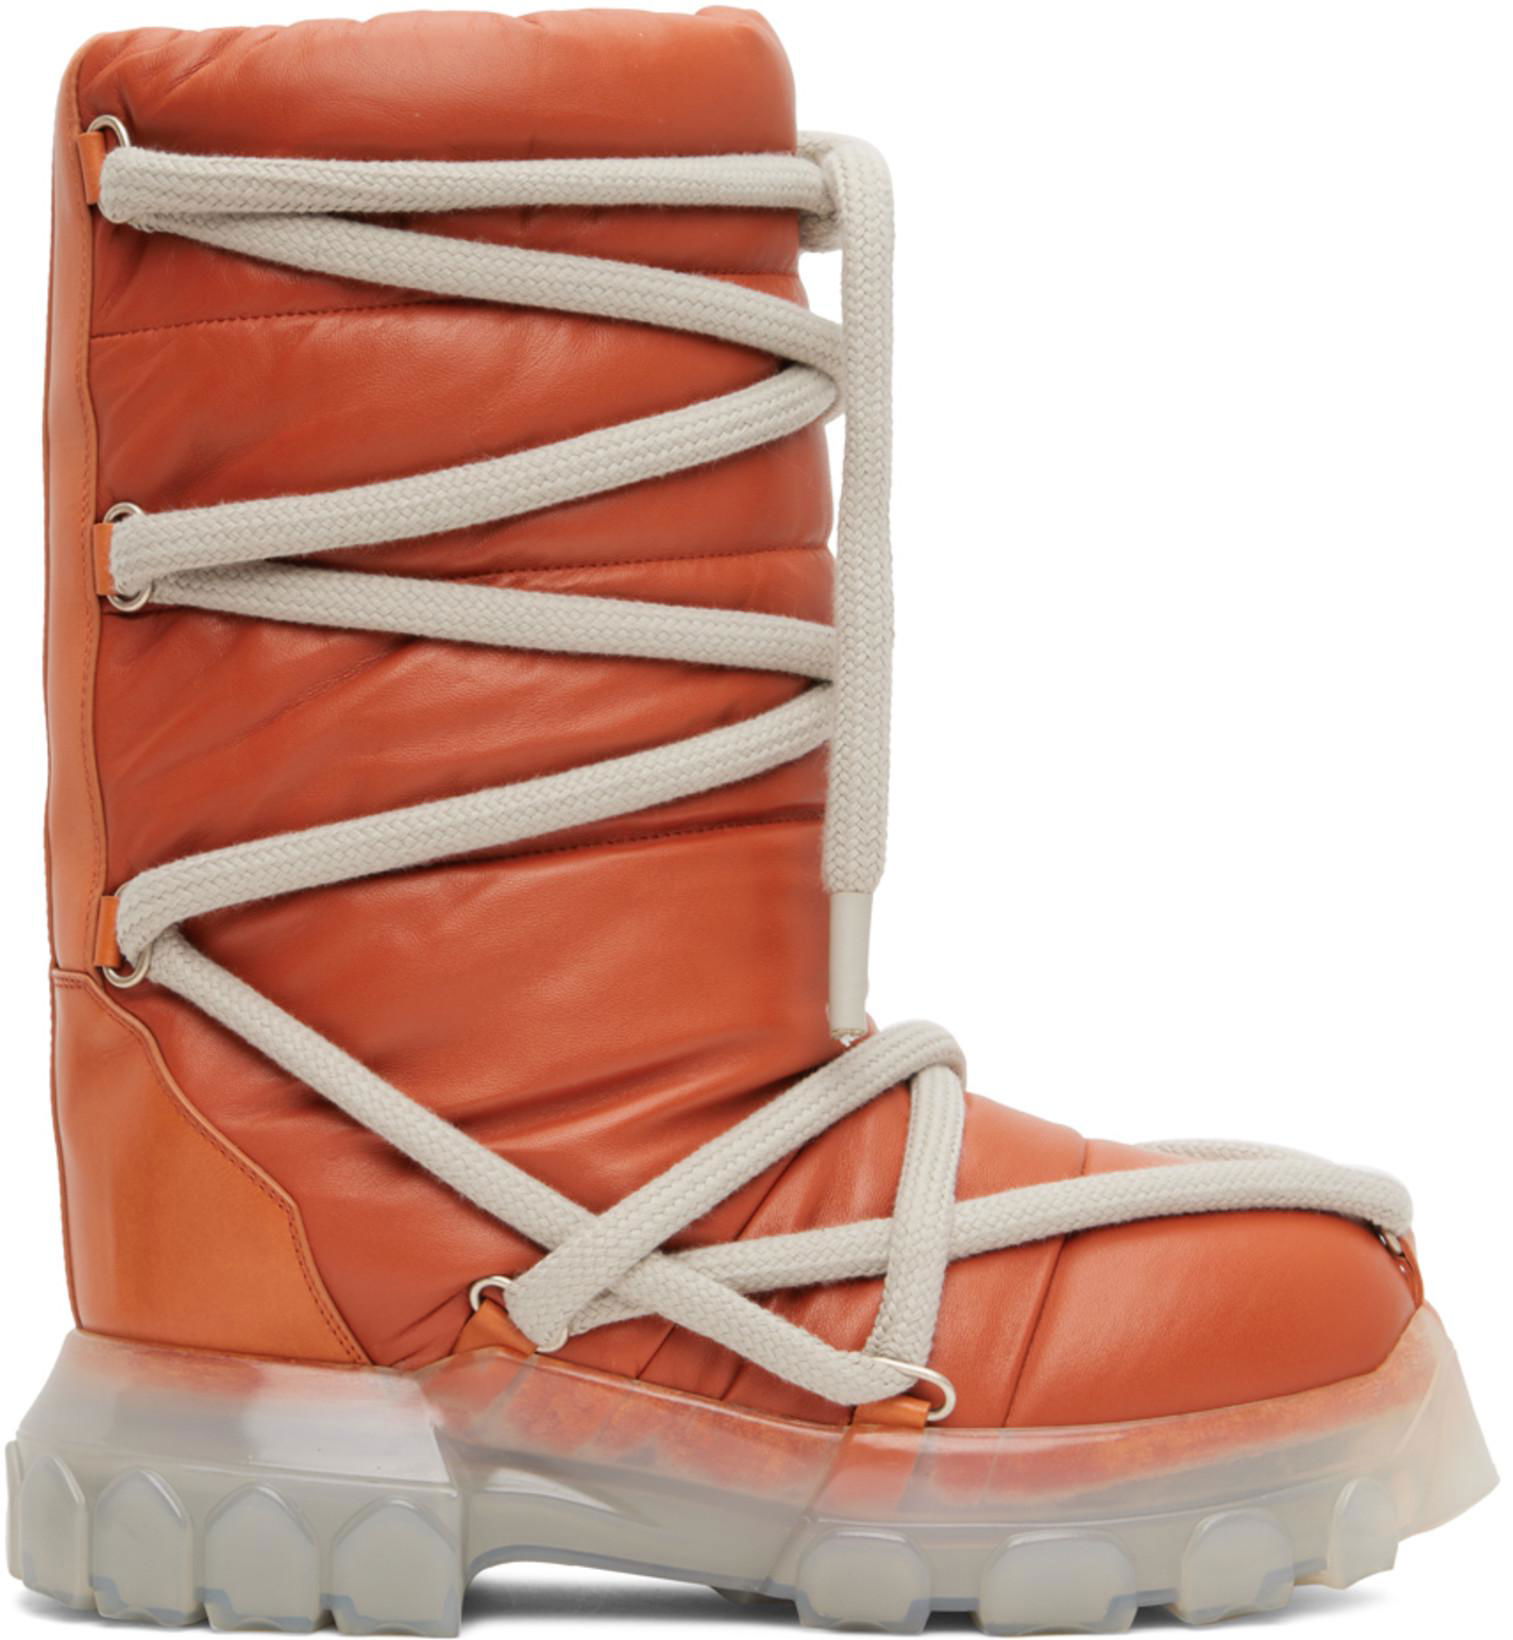 Orange Lunar Tractor Boots by RICK OWENS | jellibeans